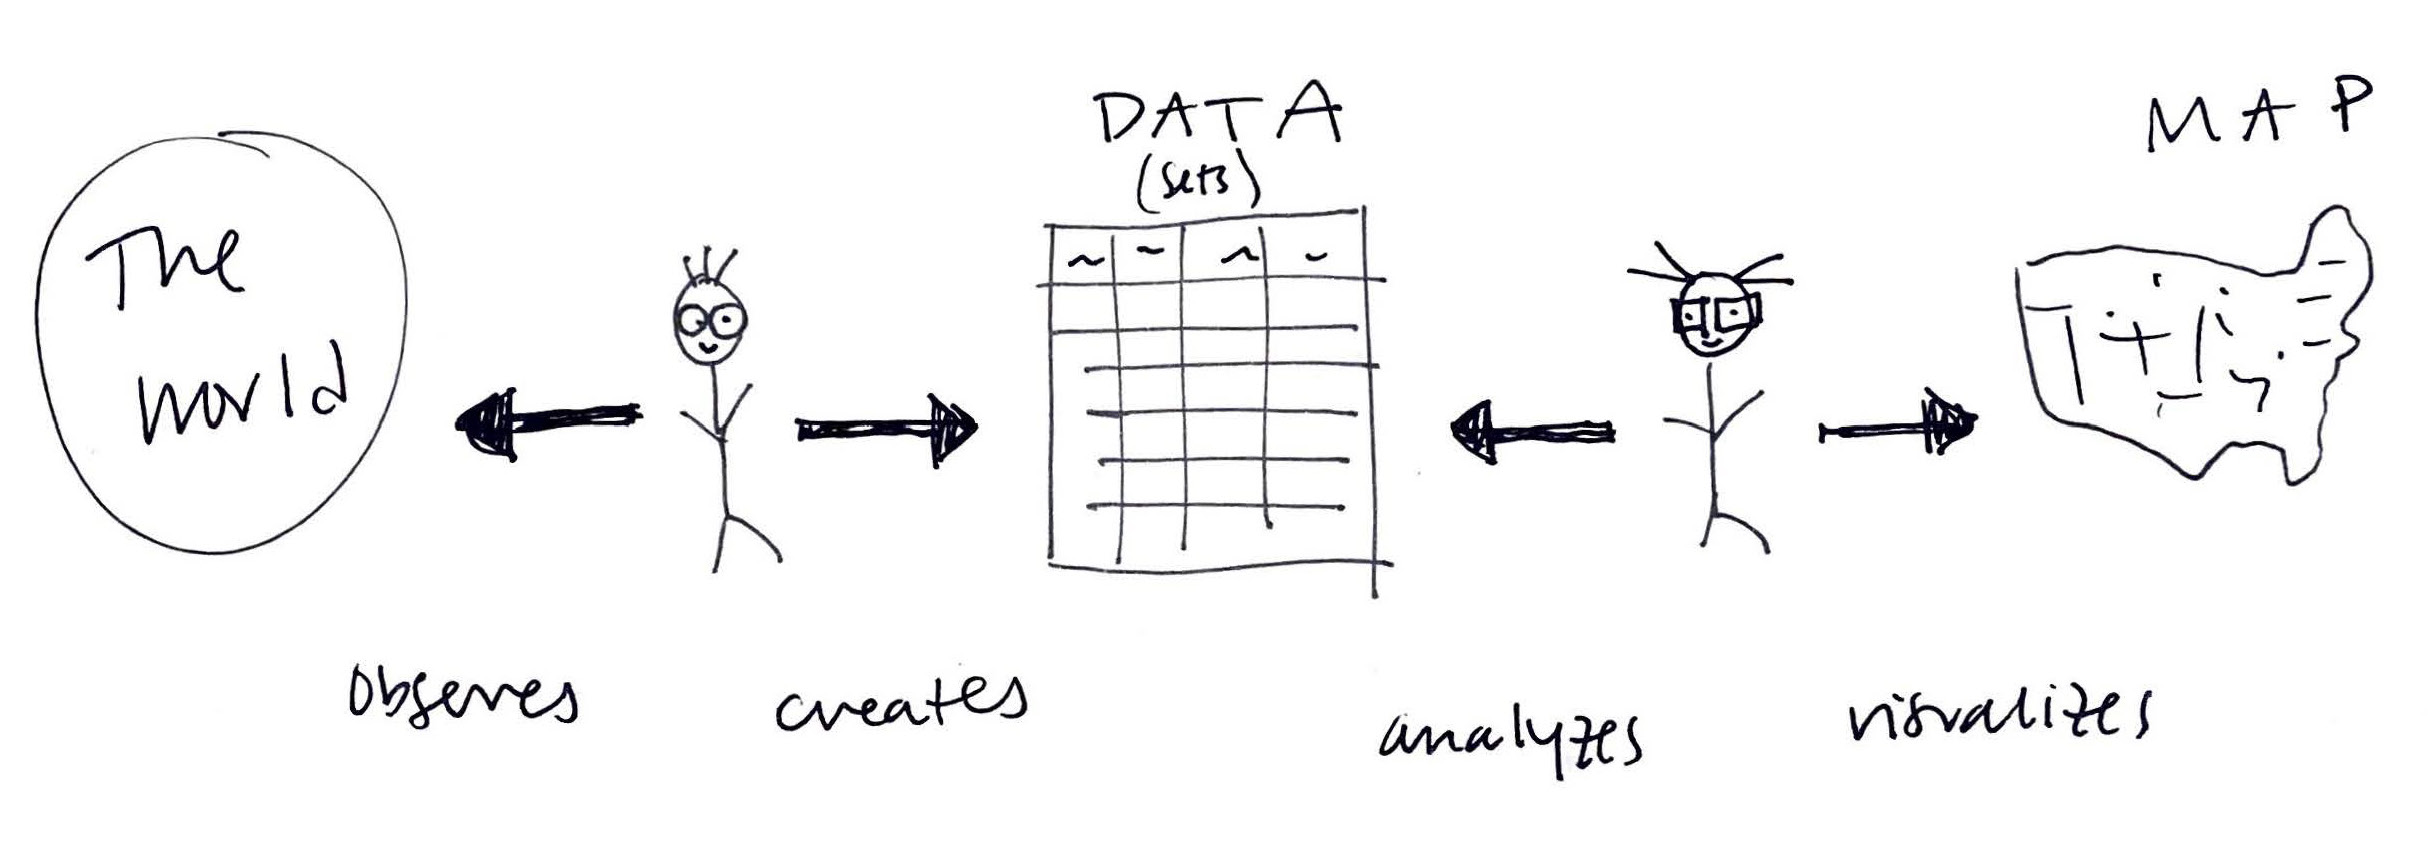 An illustration showing humans in the data and mapping process